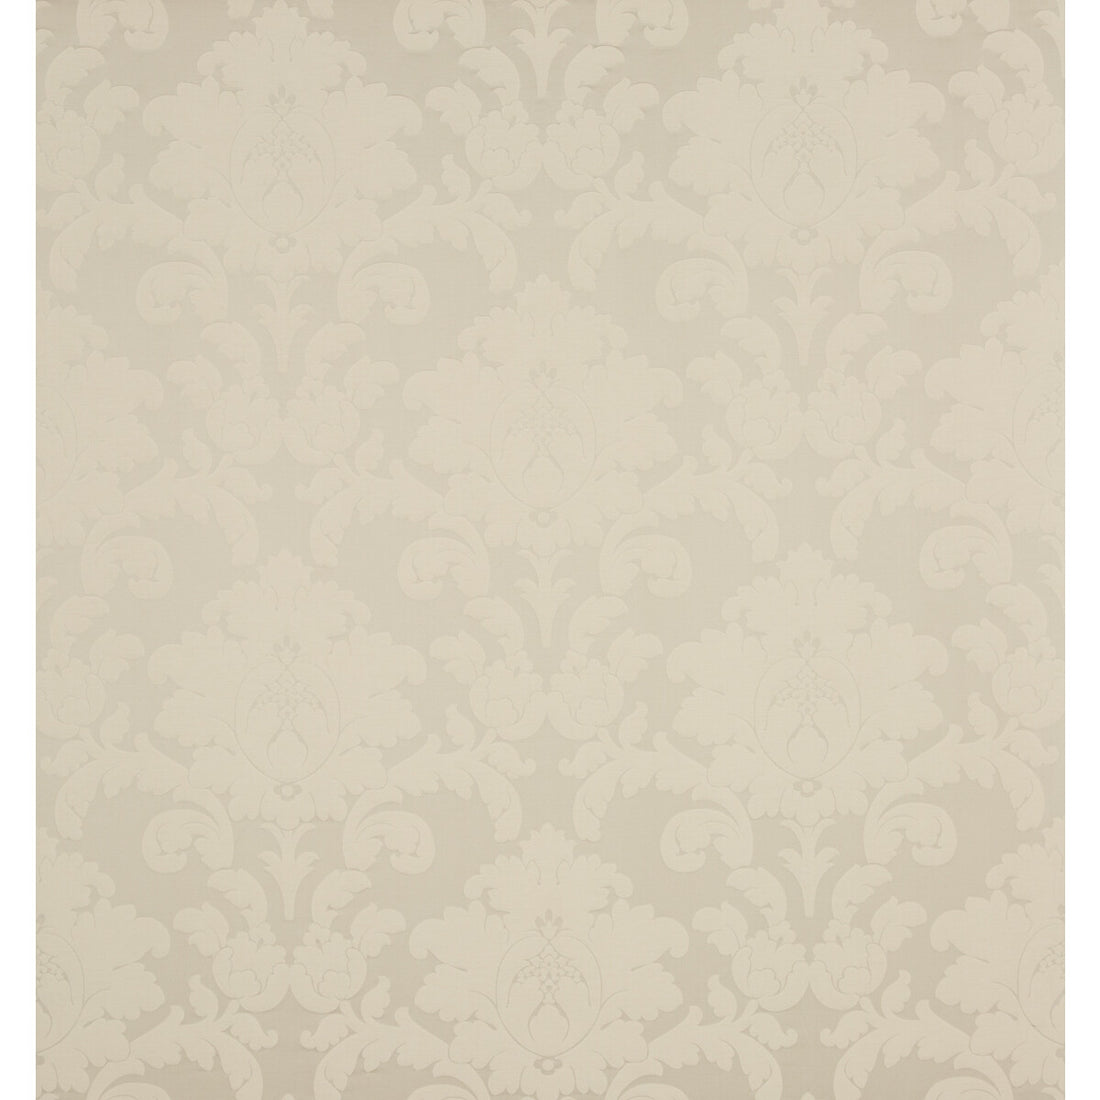 Sylvana fabric in platnium color - pattern 8014117.11.0 - by Brunschwig &amp; Fils in the Maisonnette collection